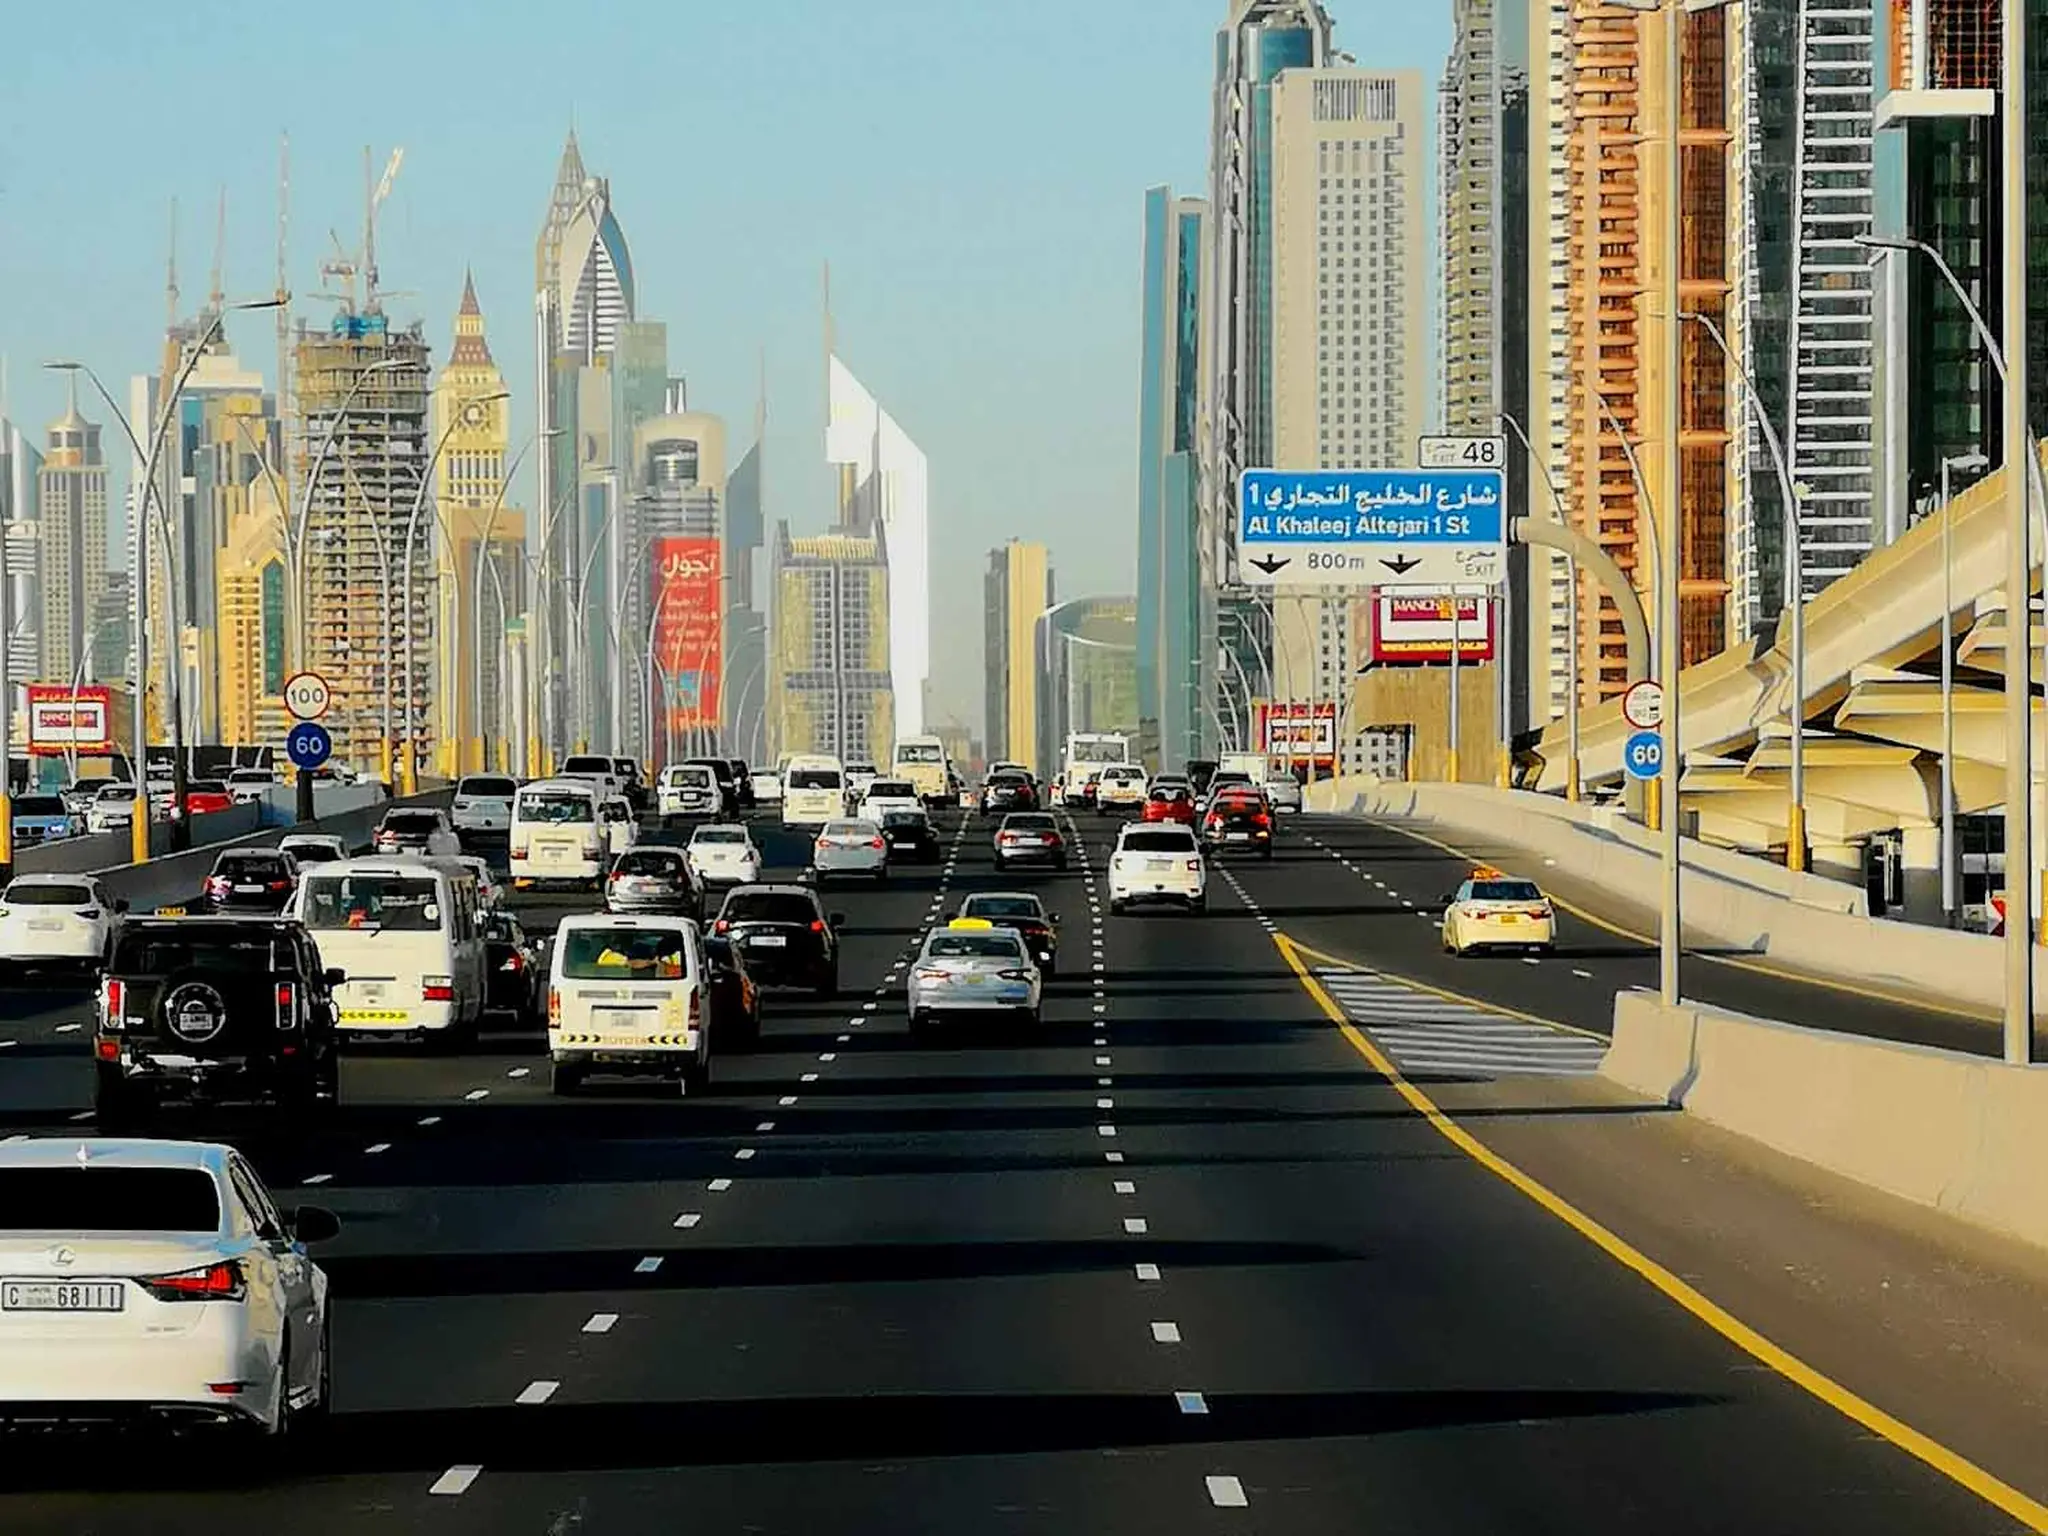 Dubai Roads announces a ban on some vehicles in several areas